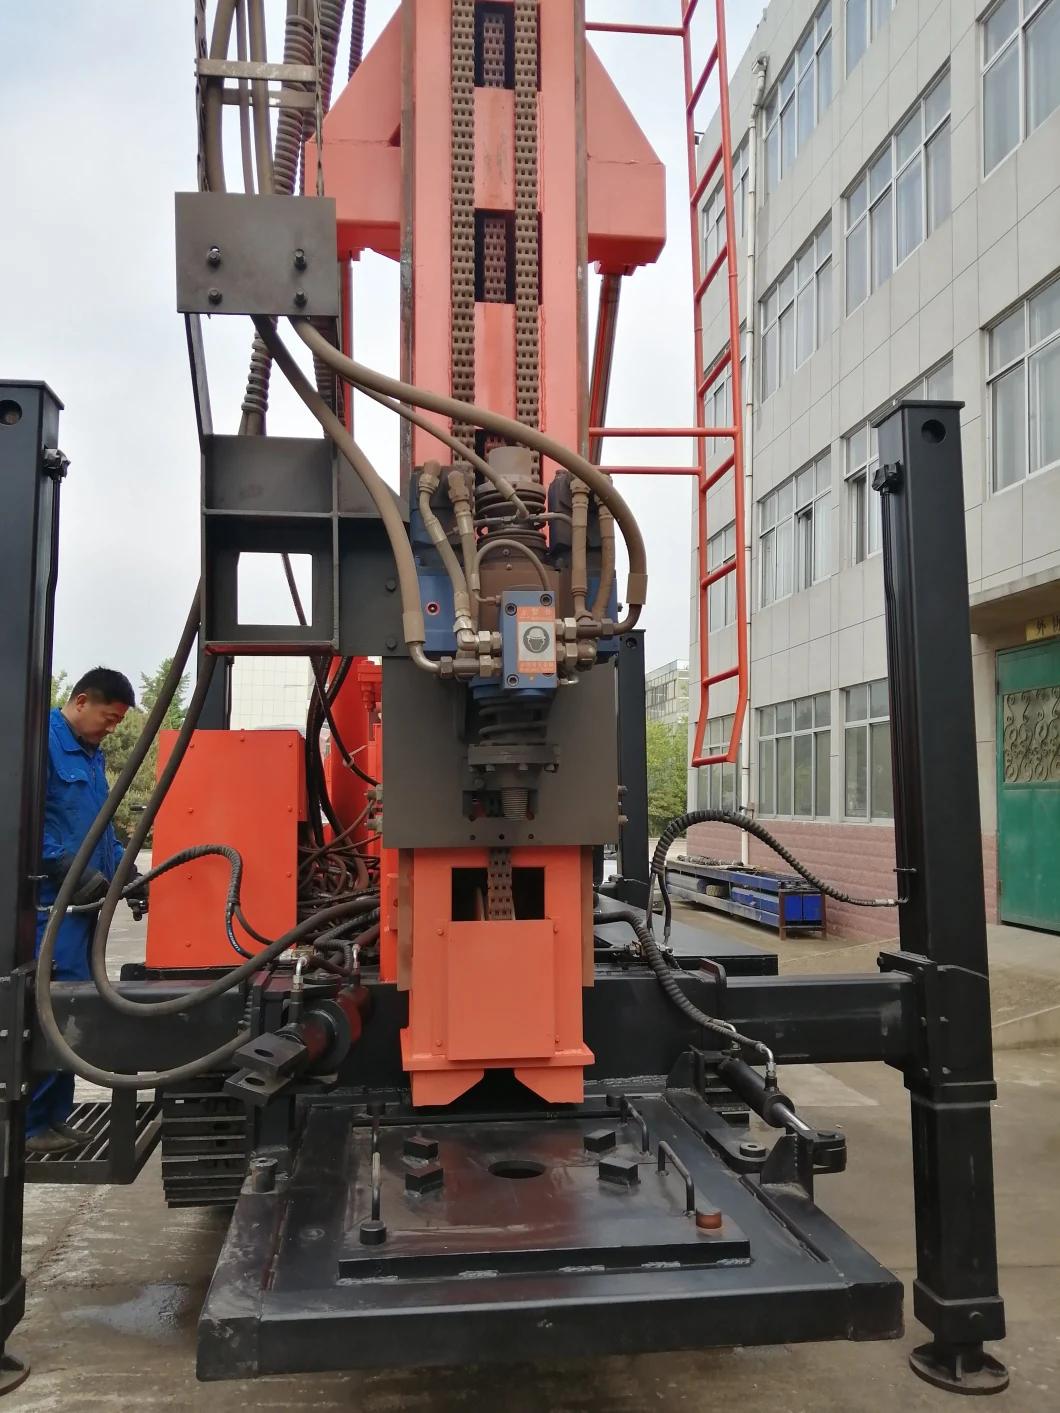 500m 600m Sly650 Deep DTH Borehole Water Well Drill Rig Deep Hole Drilling Machine